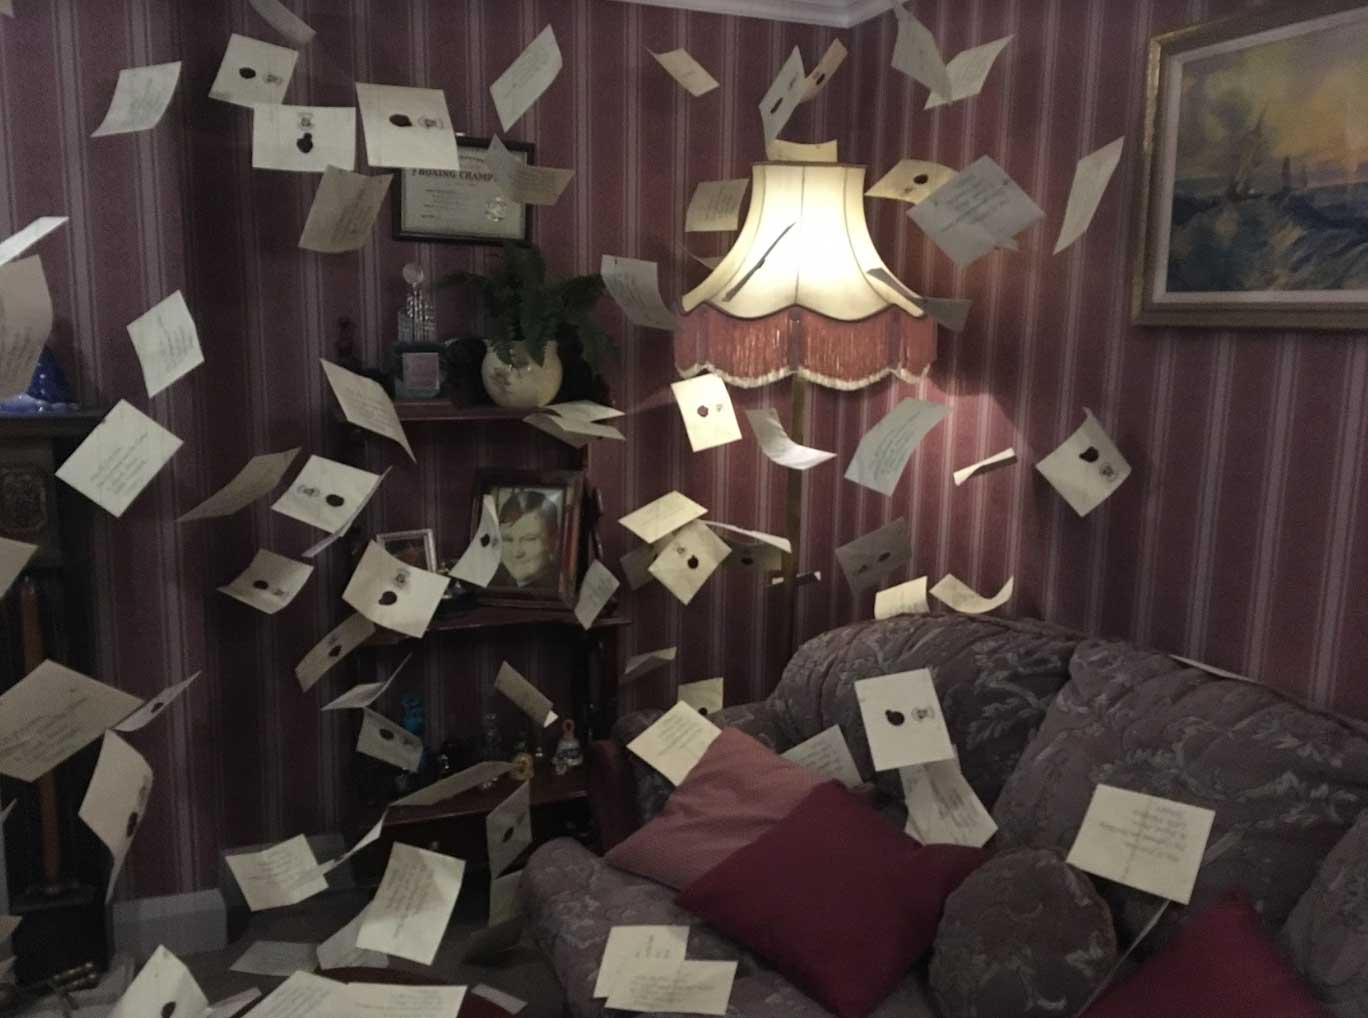 Dursley household from WB Studio tour, Watford | Readable, readability calculator 